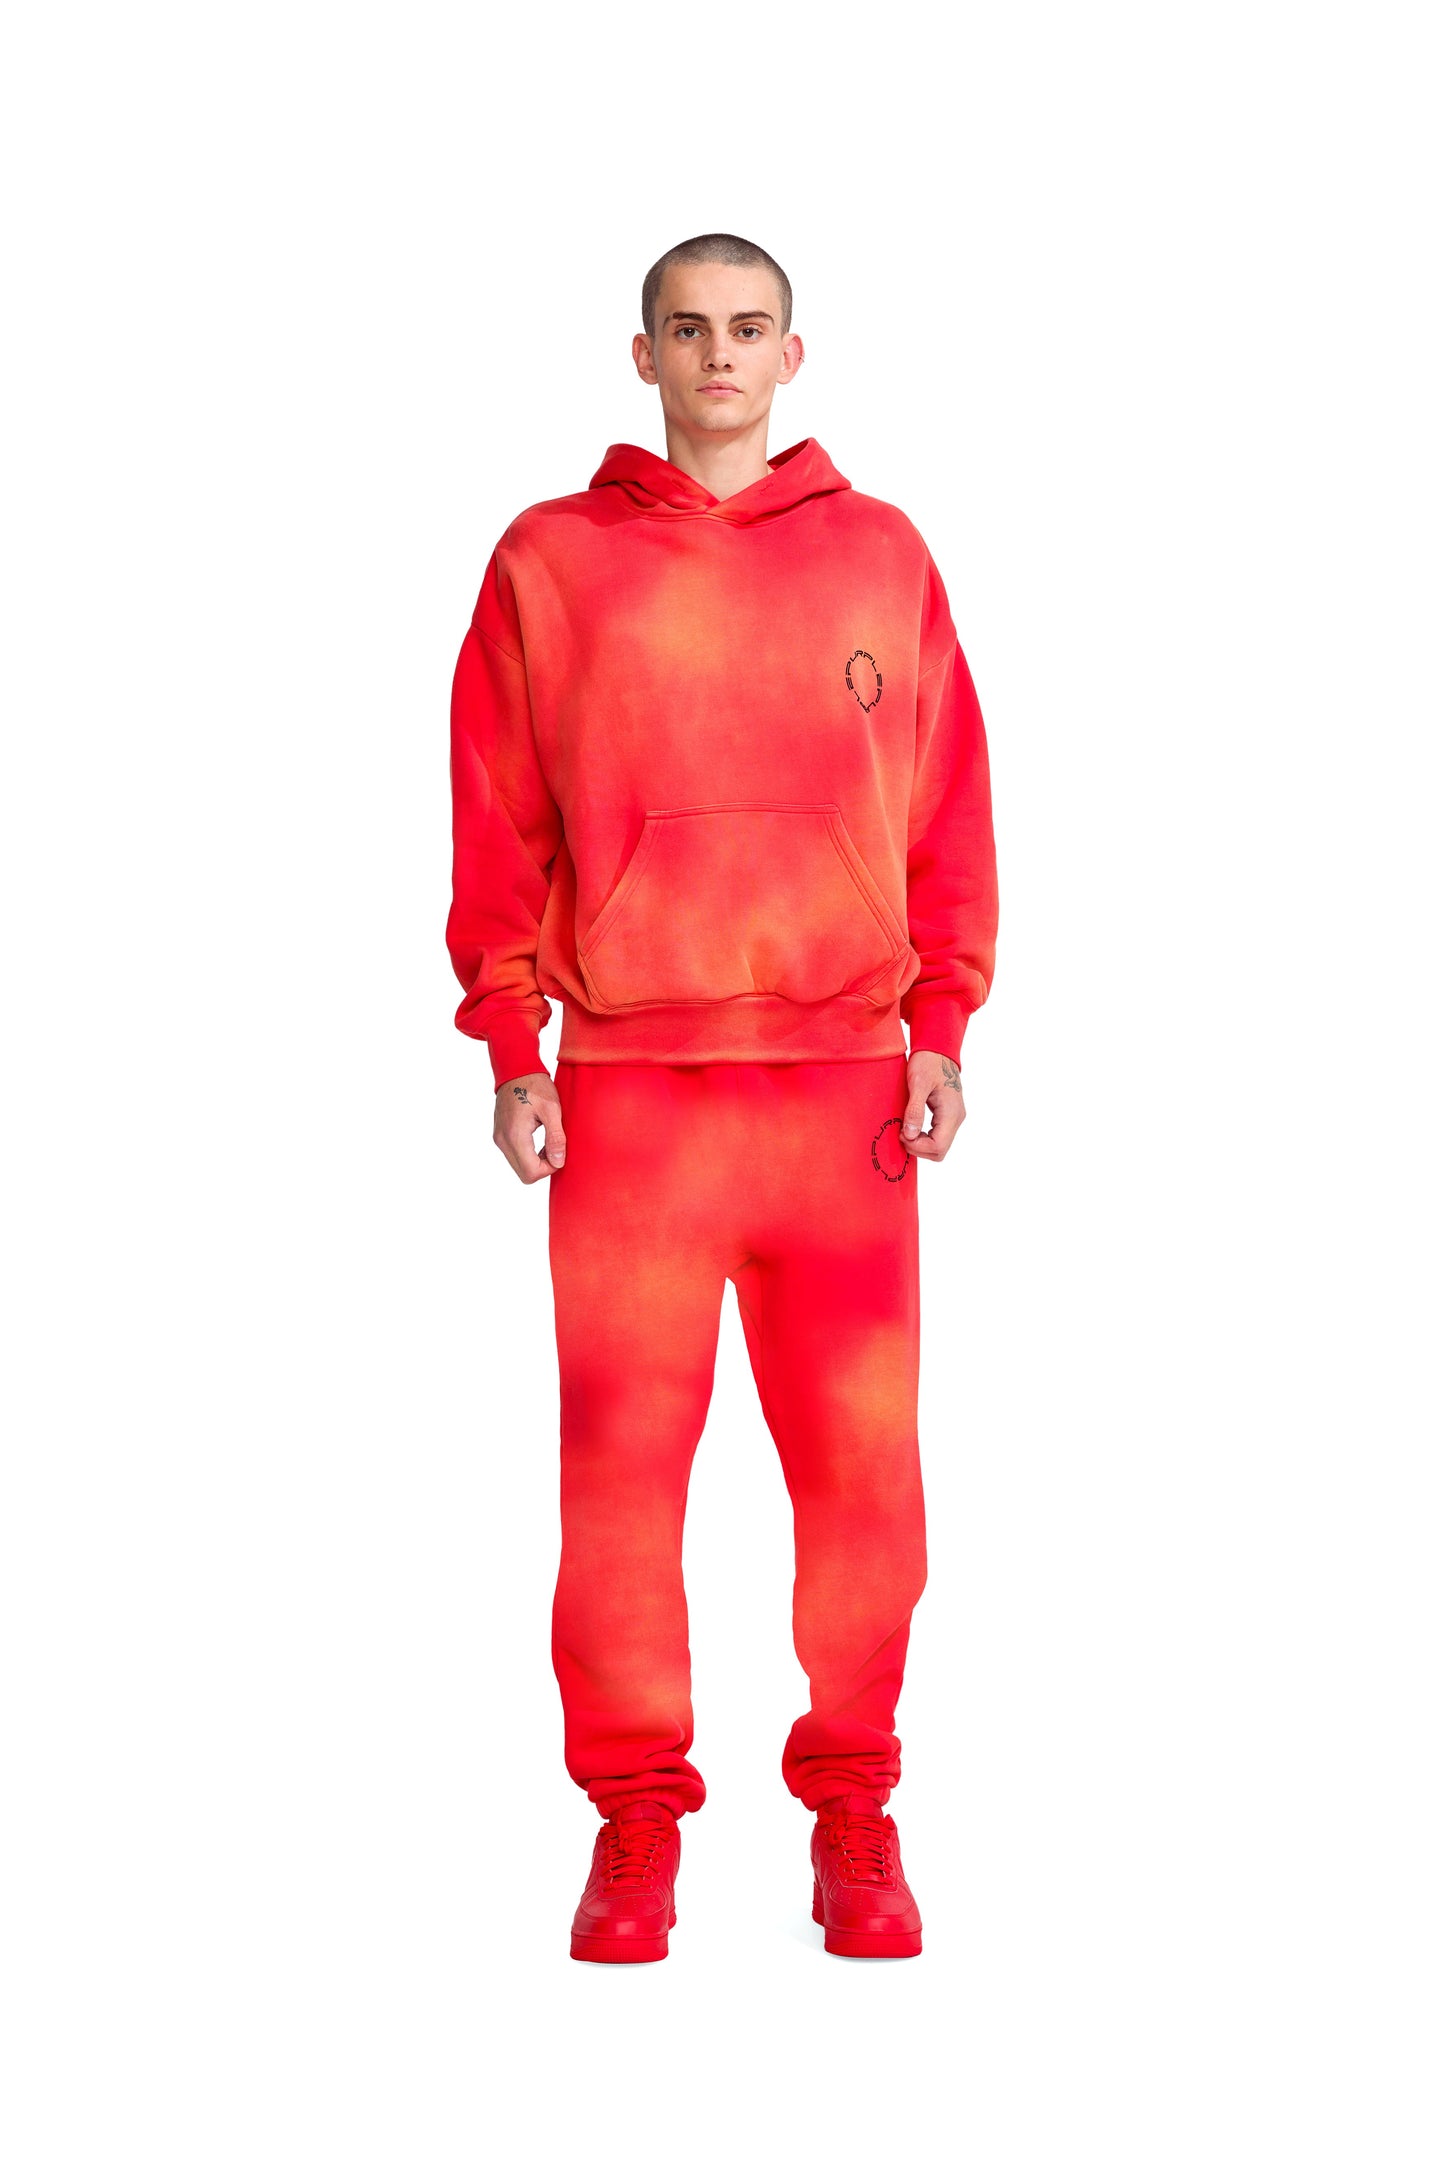 P401 OVERSIZED HOODIE - New World in Fiery Red